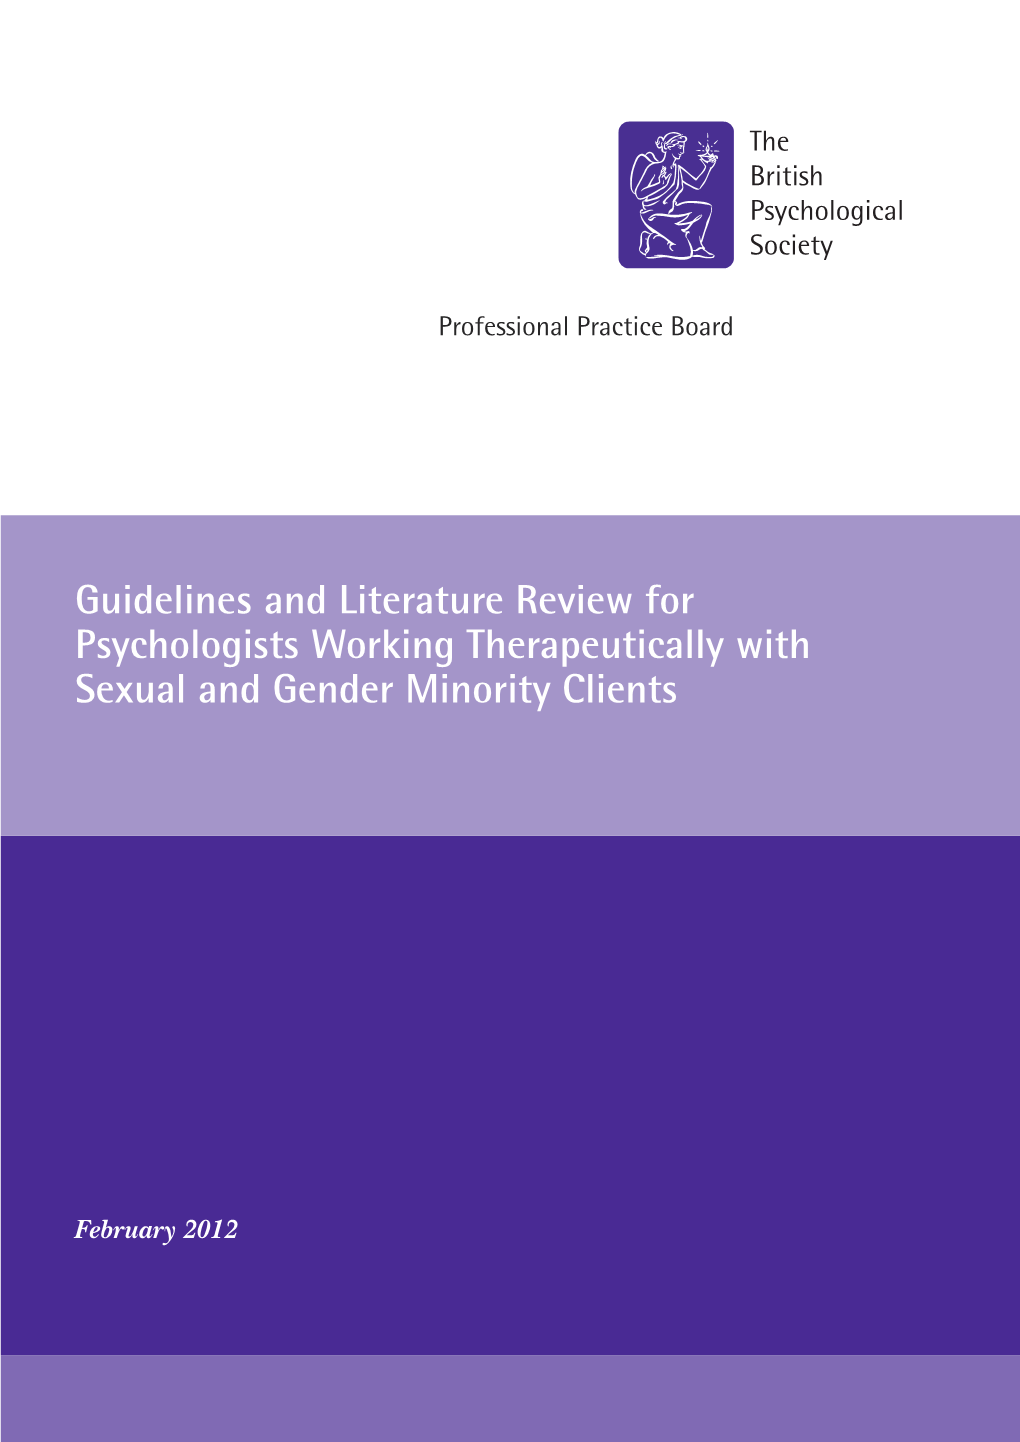 Guidelines and Literature Review for Psychologists Working Therapeutically with Sexual and Gender Minority Clients